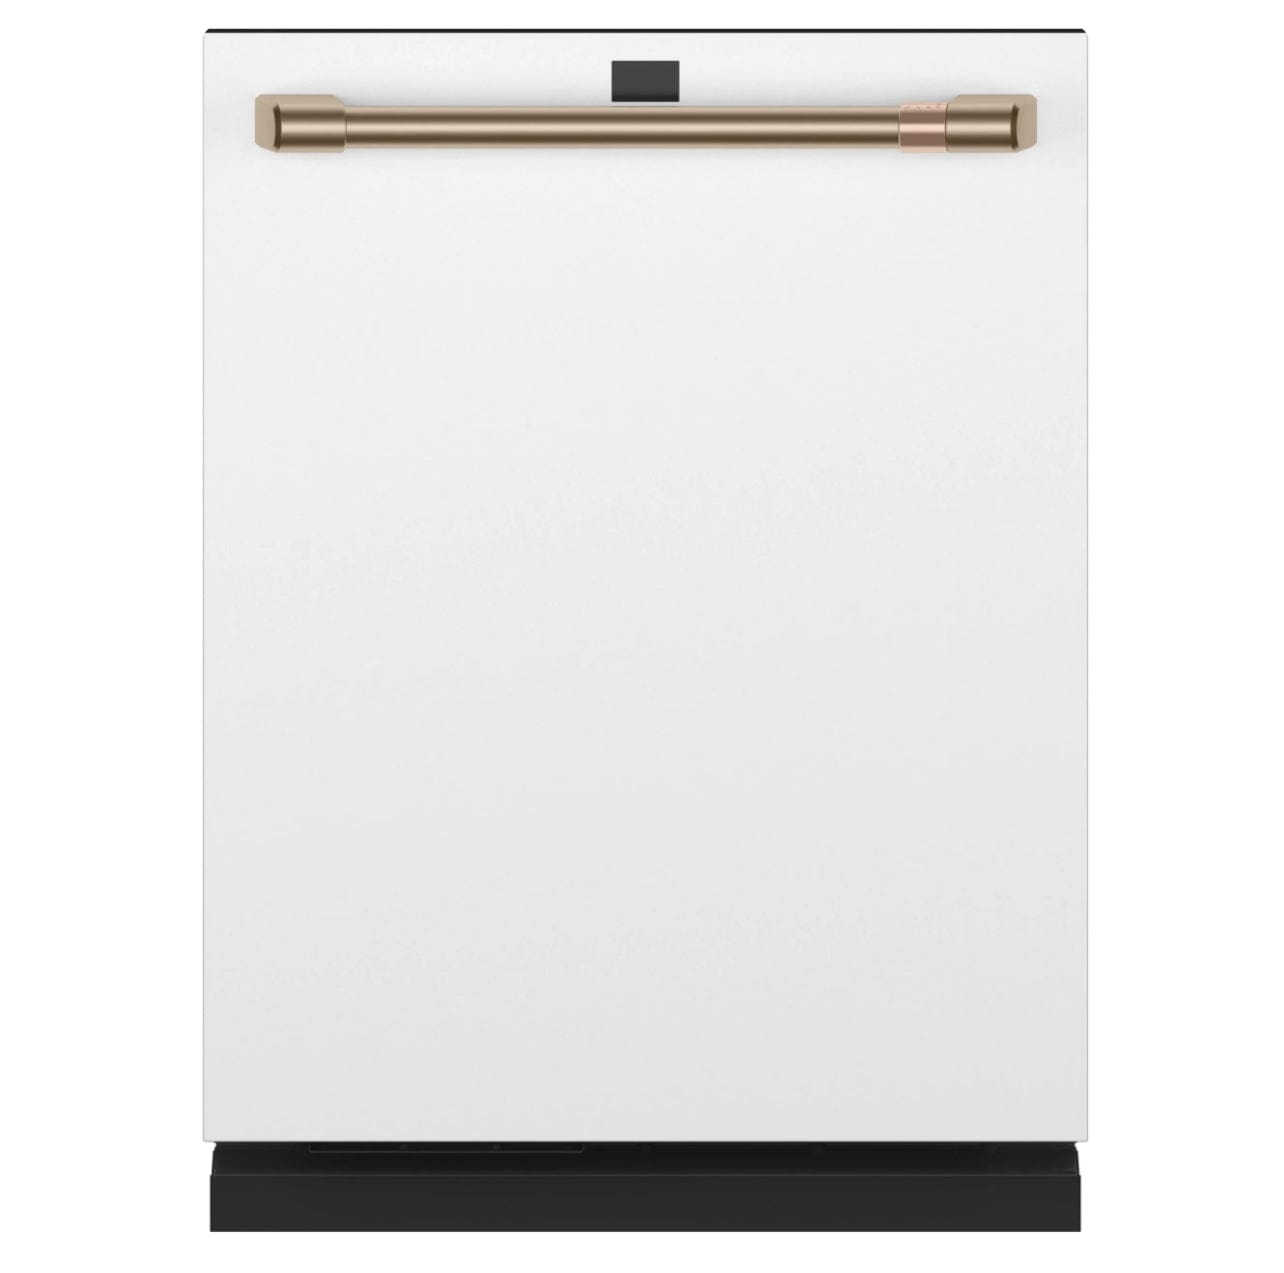 Sleek and Smart: Cafe CDT875P4NW2 24" Matte White Dishwasher with WiFi, 5 Wash Cycles, and 16-Place Setting Capacity